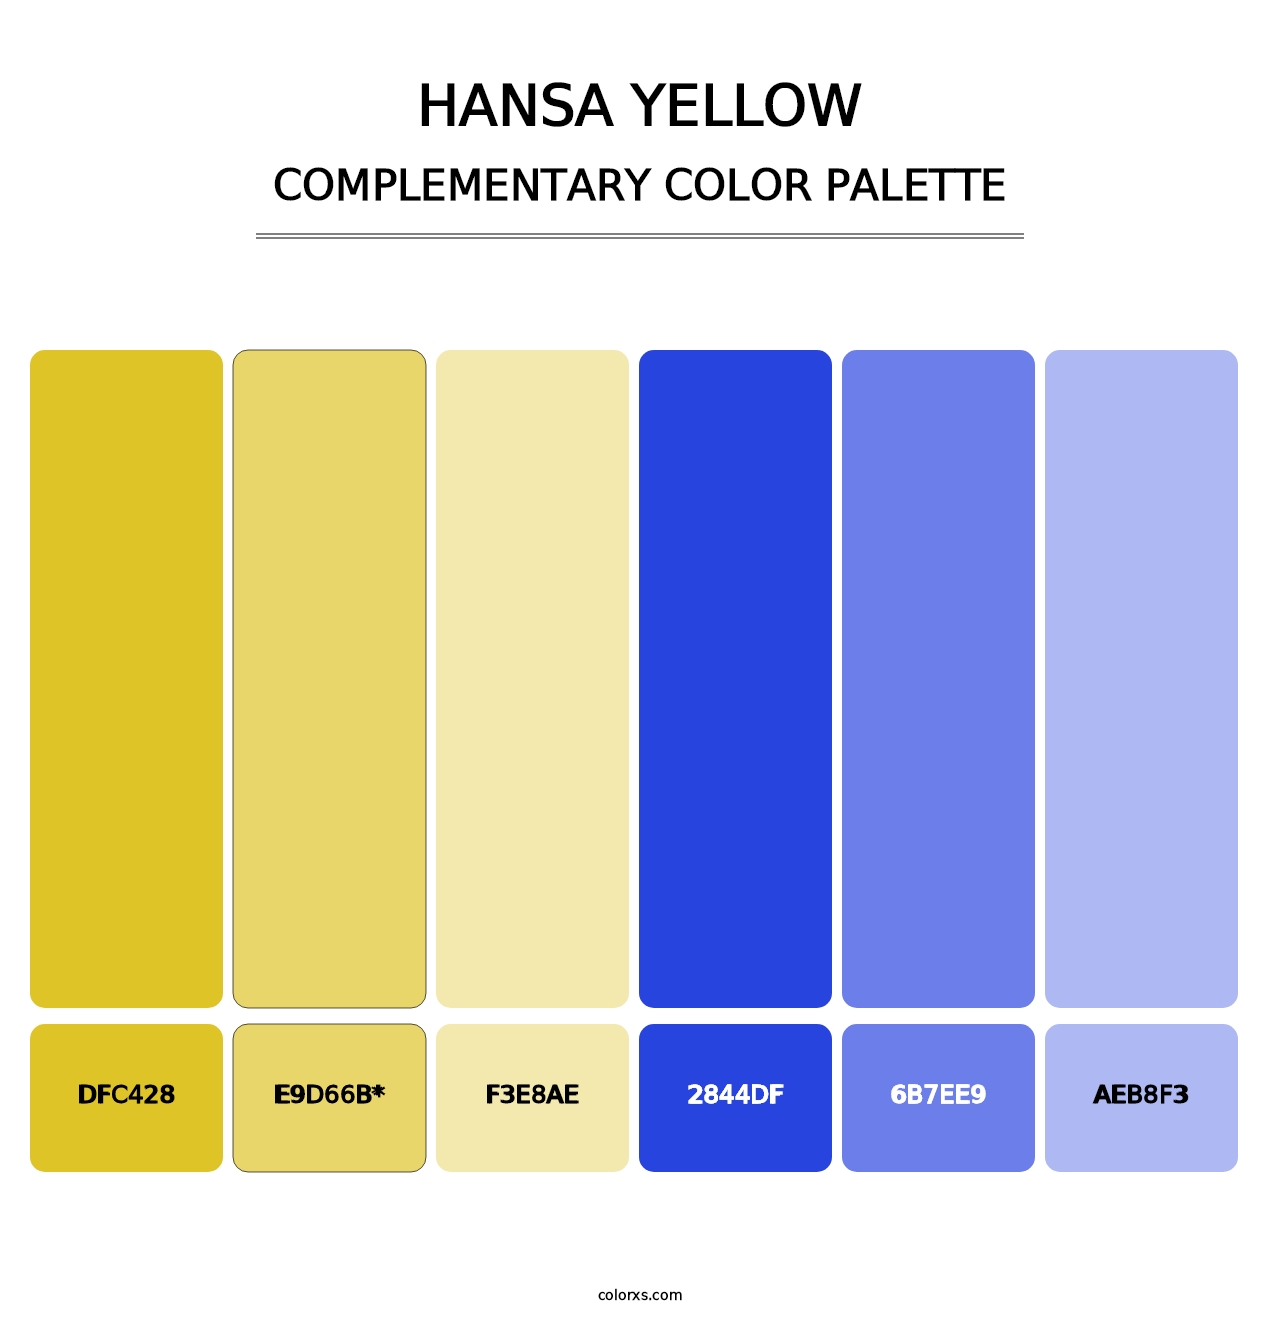 Hansa Yellow - Complementary Color Palette